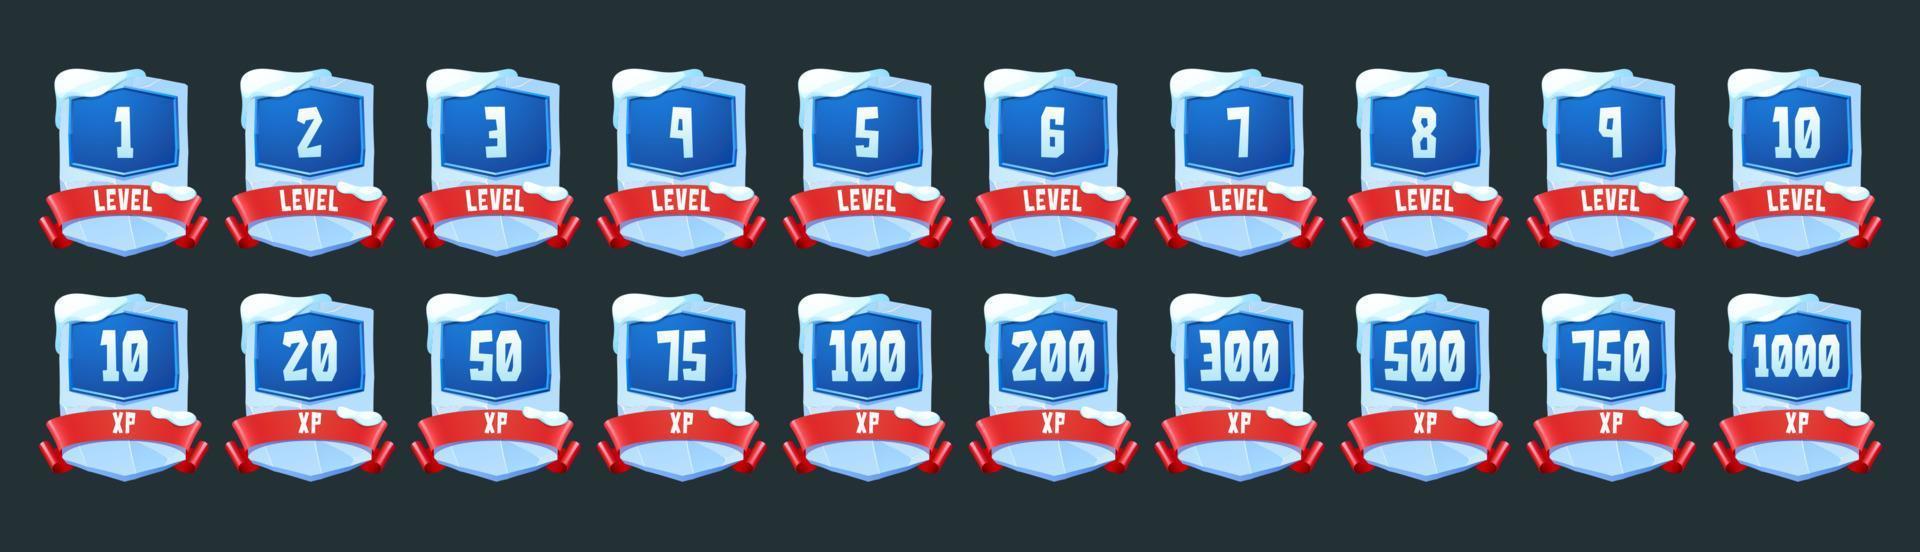 Ice badges with level number and xp for game vector